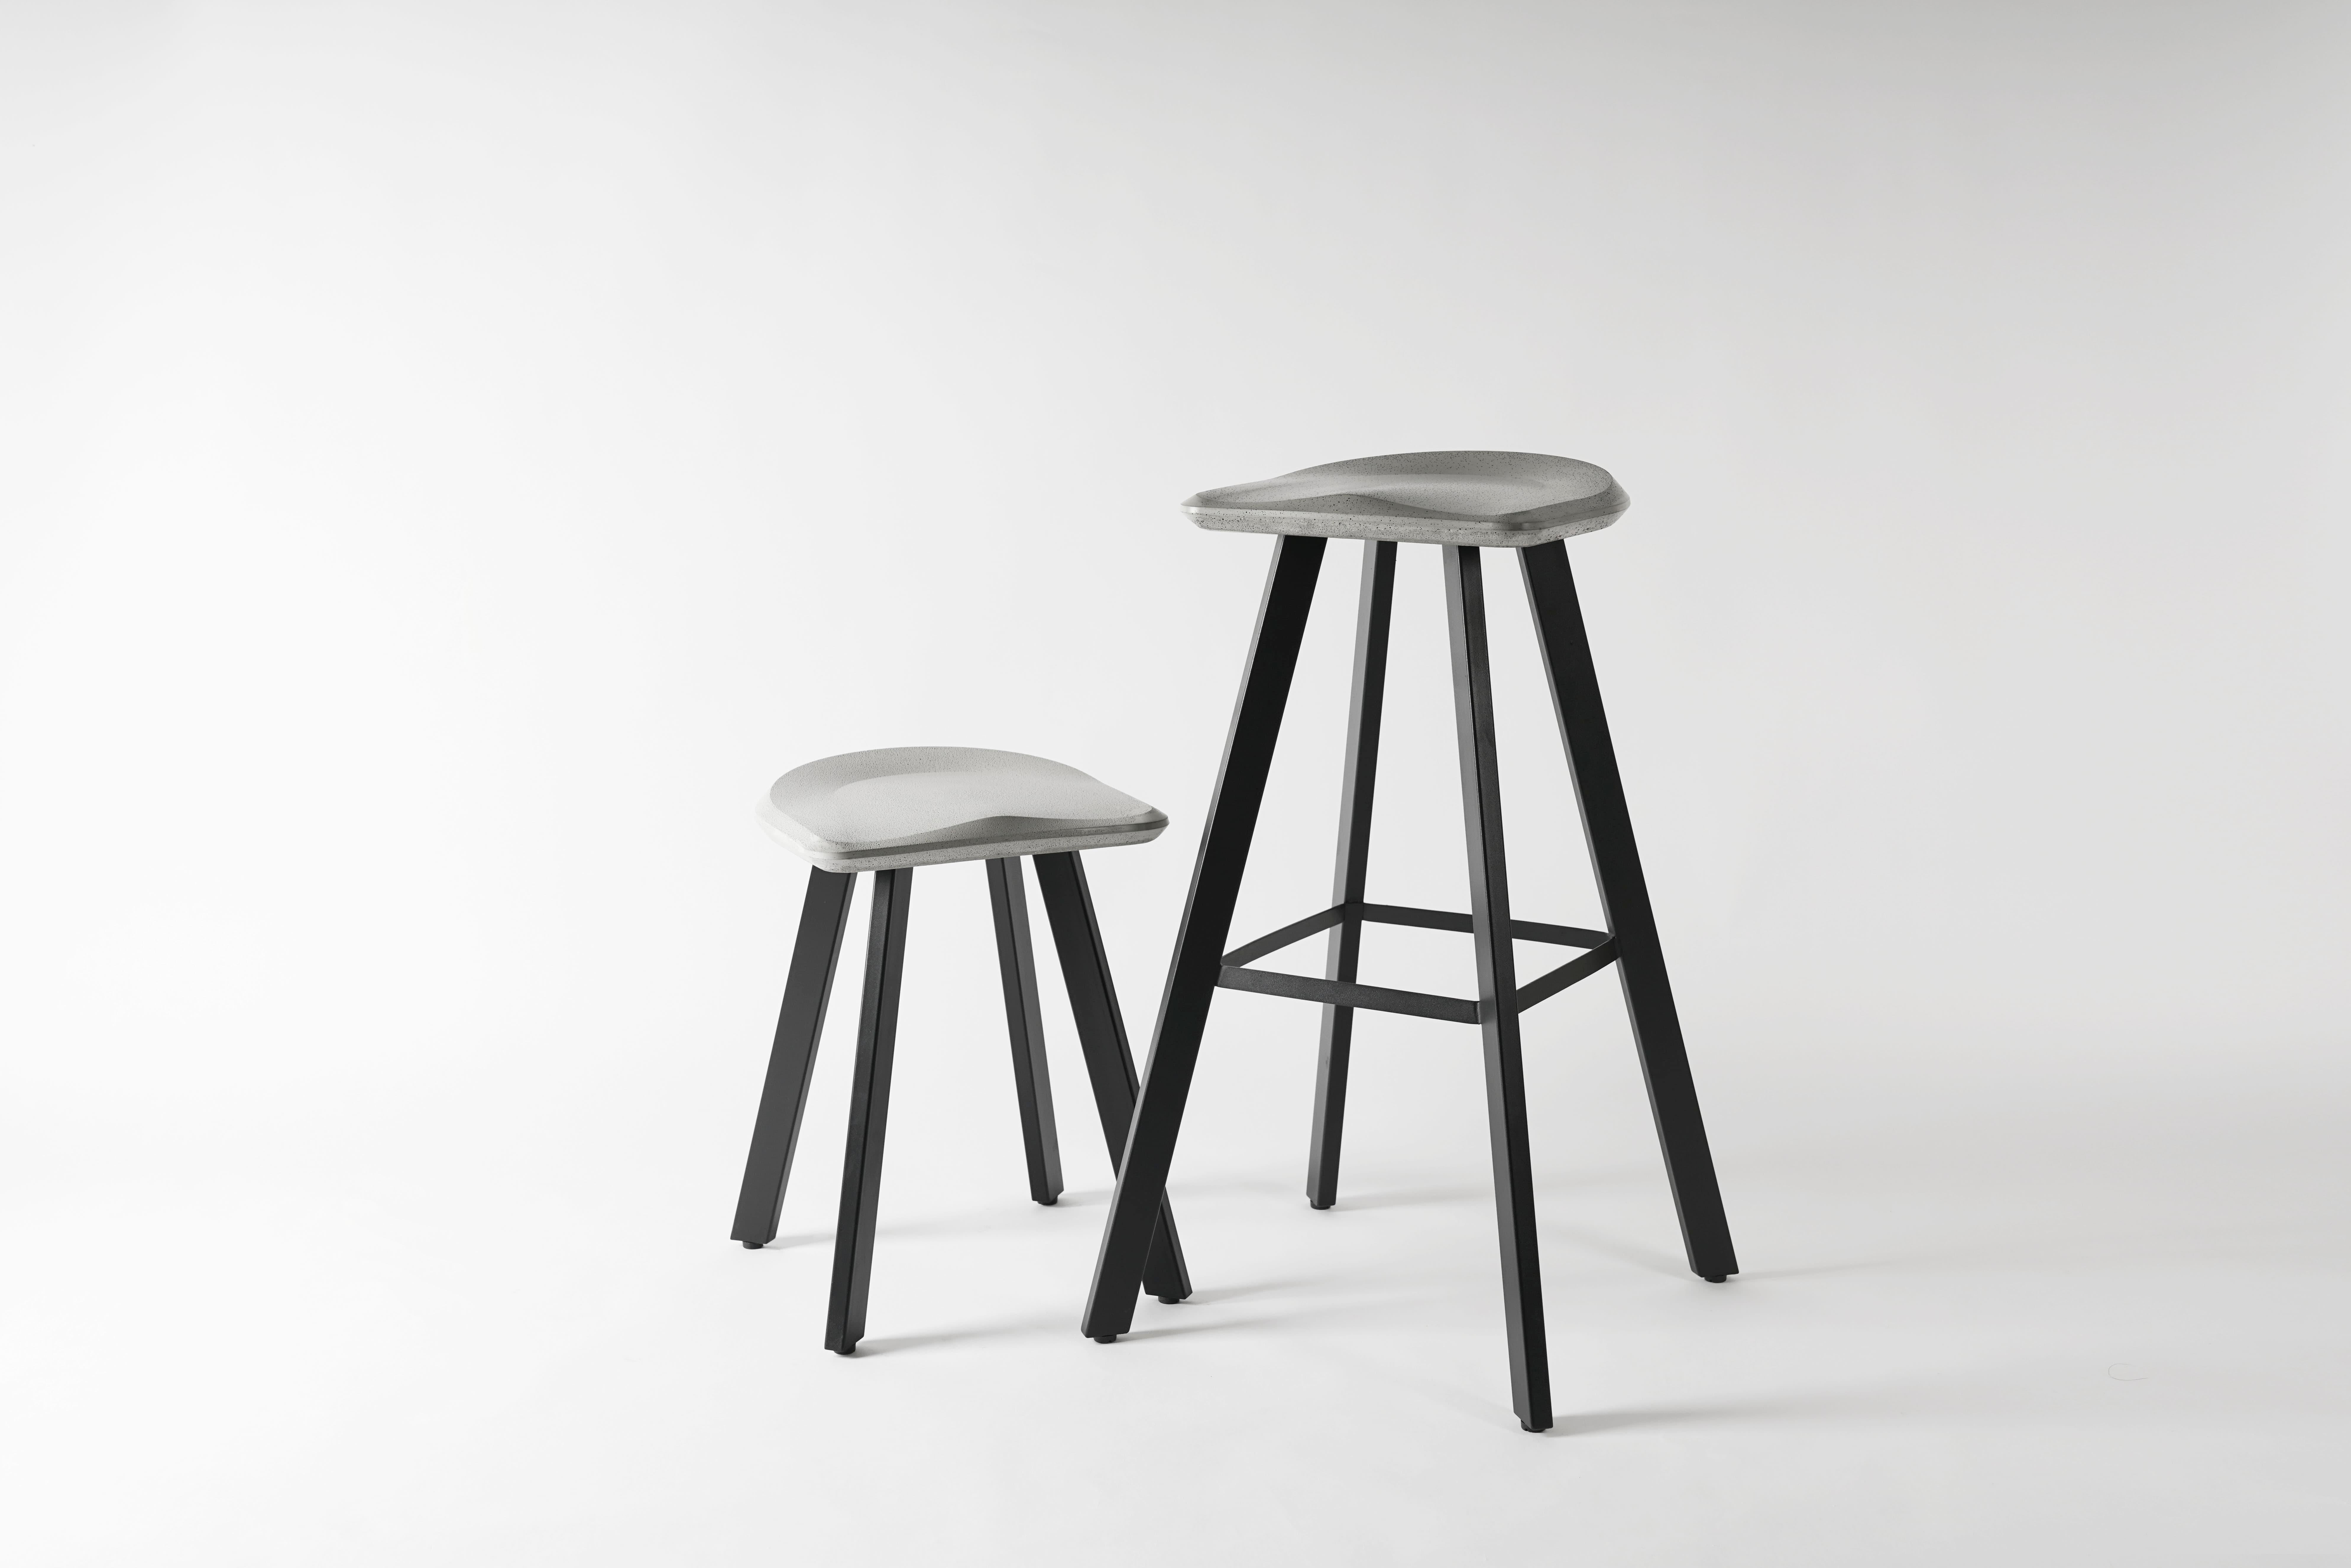 Chinese Contemporary Stool 'A' Made of Concrete and Aluminum For Sale